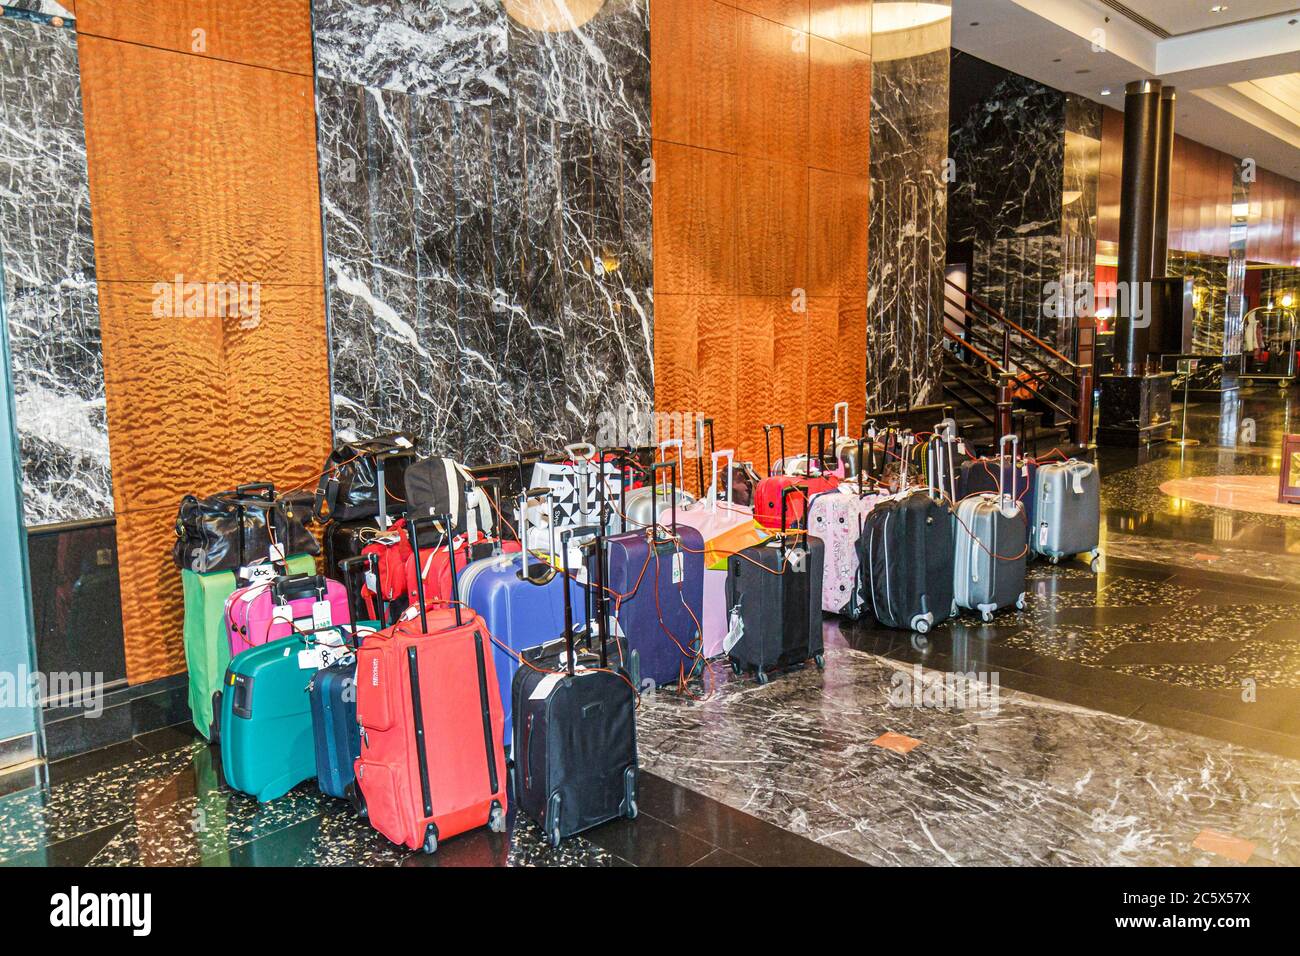 New York City,NYC NY Manhattan,Midtown,Millennium Broadway Hotel New York,chain,hospitality,guest service,lobby,luggage,suitcase storage,chained,NY110 Stock Photo